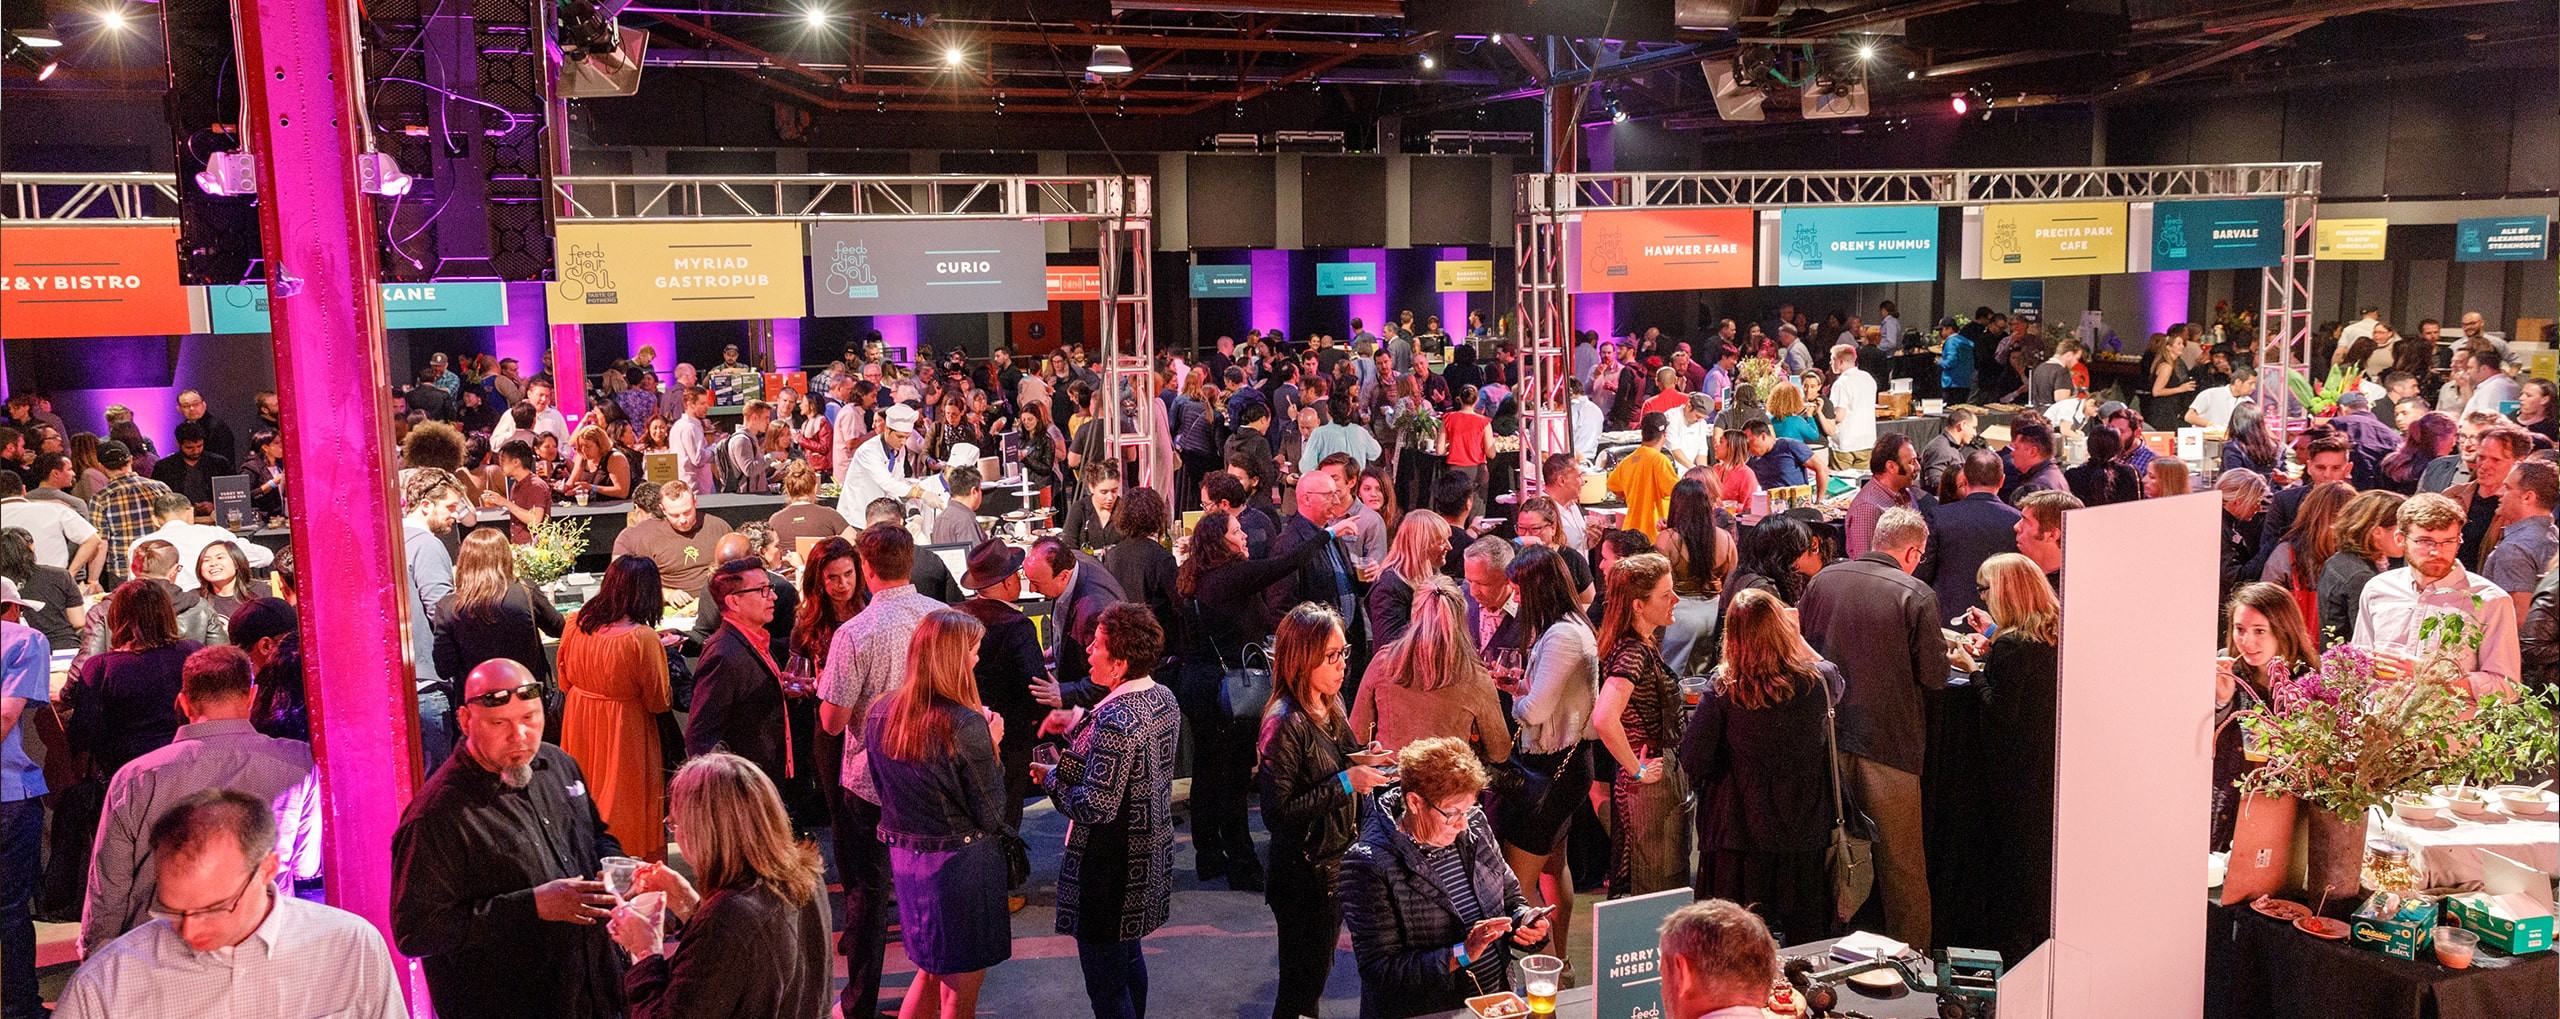 San Francisco Event Venue, The Midway, Interior, Event, Conference, Day